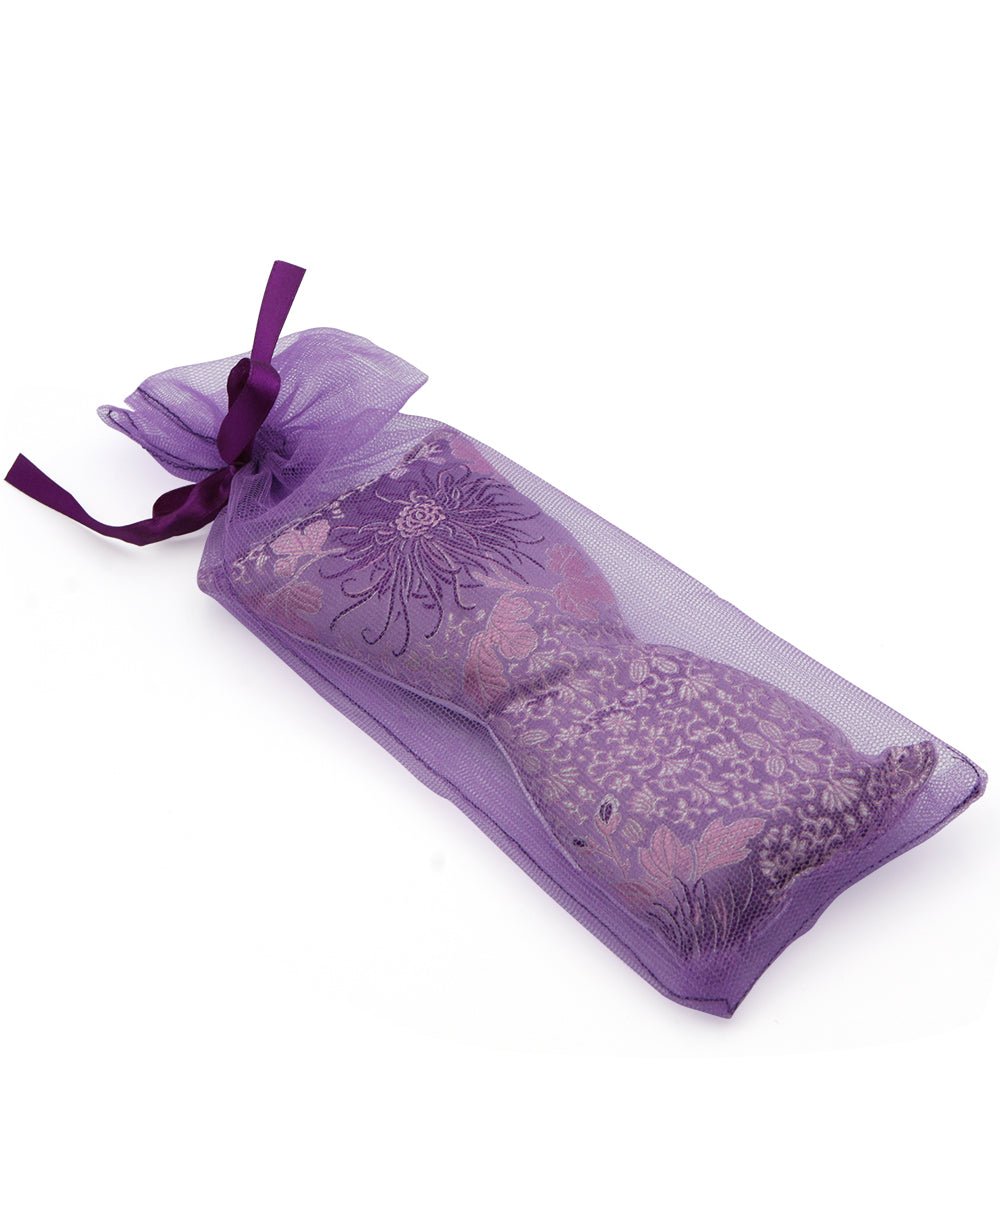 Relaxing Lavender Eye Pillow, Made in the USA - Eye Pillows Blossom